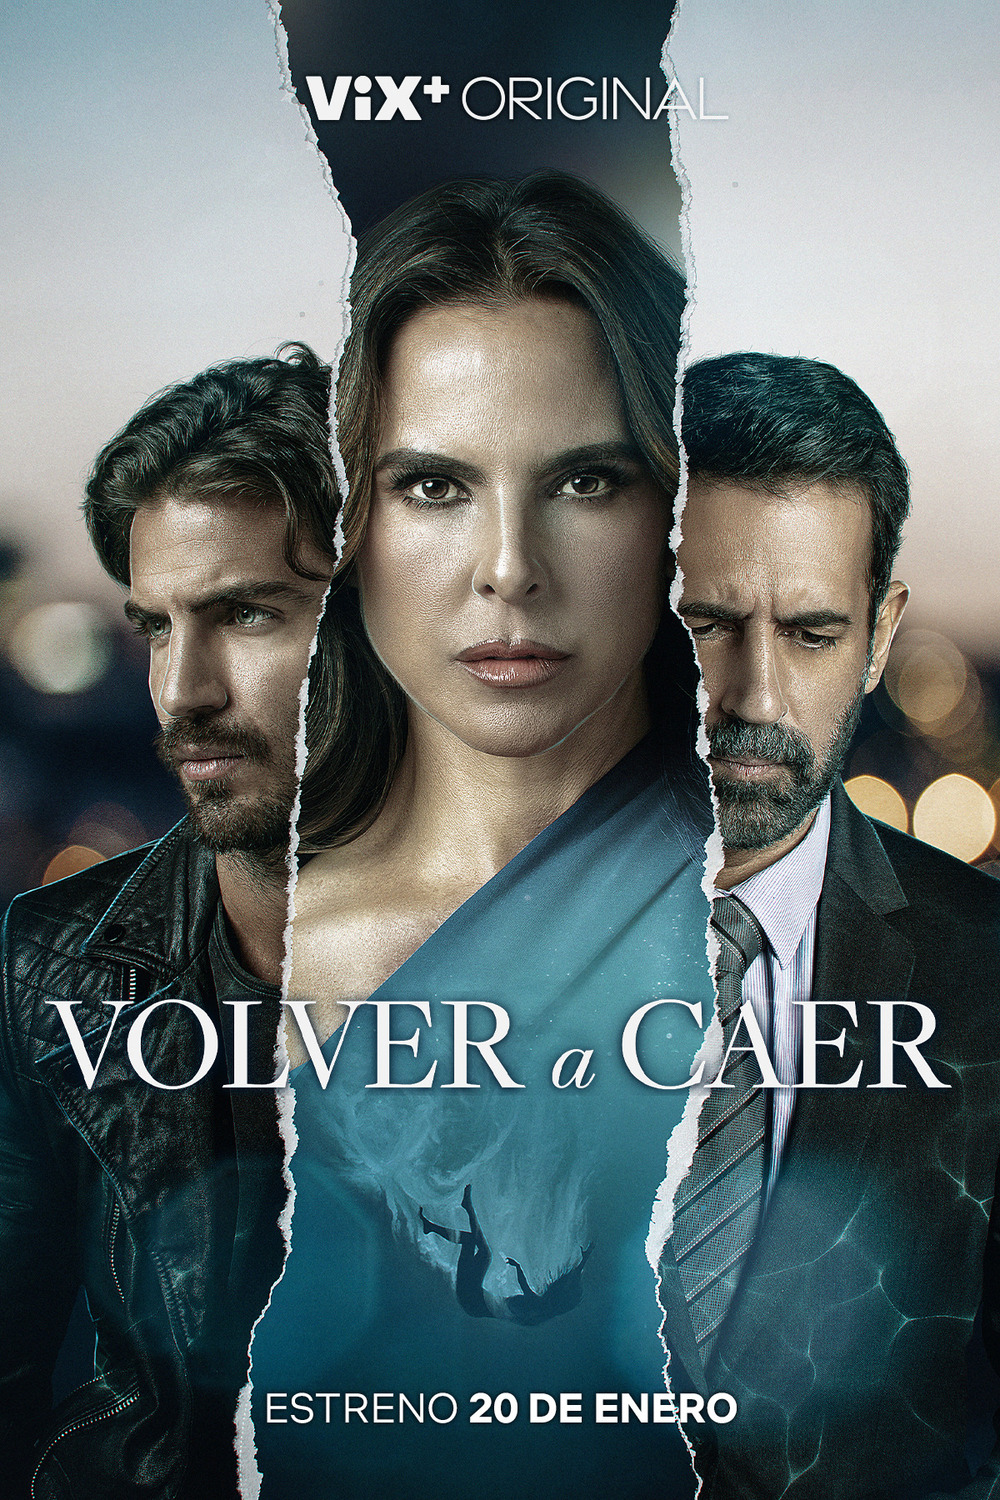 Extra Large TV Poster Image for Volver a caer 